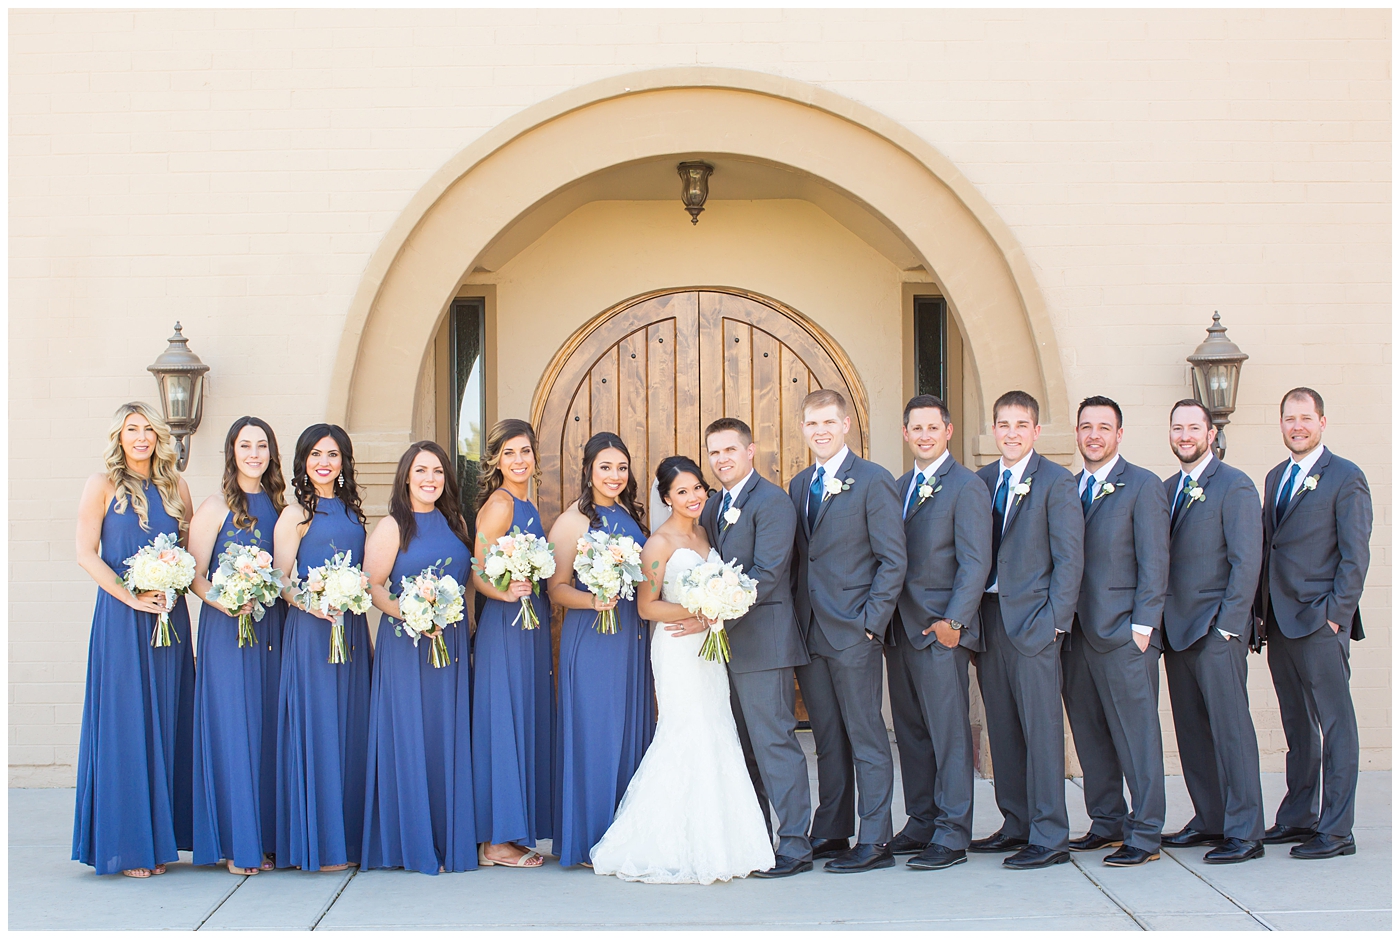 Bride in strapless maggie sorrento dress with soft white and pink roses, peonies, hydrangeas and greenery bouquet and groom in light gray suit with blue tie and white rose boutonniere with bridesmaids in blue maxi dresses and groomsmen in gray suits bridal party wedding day portrait 